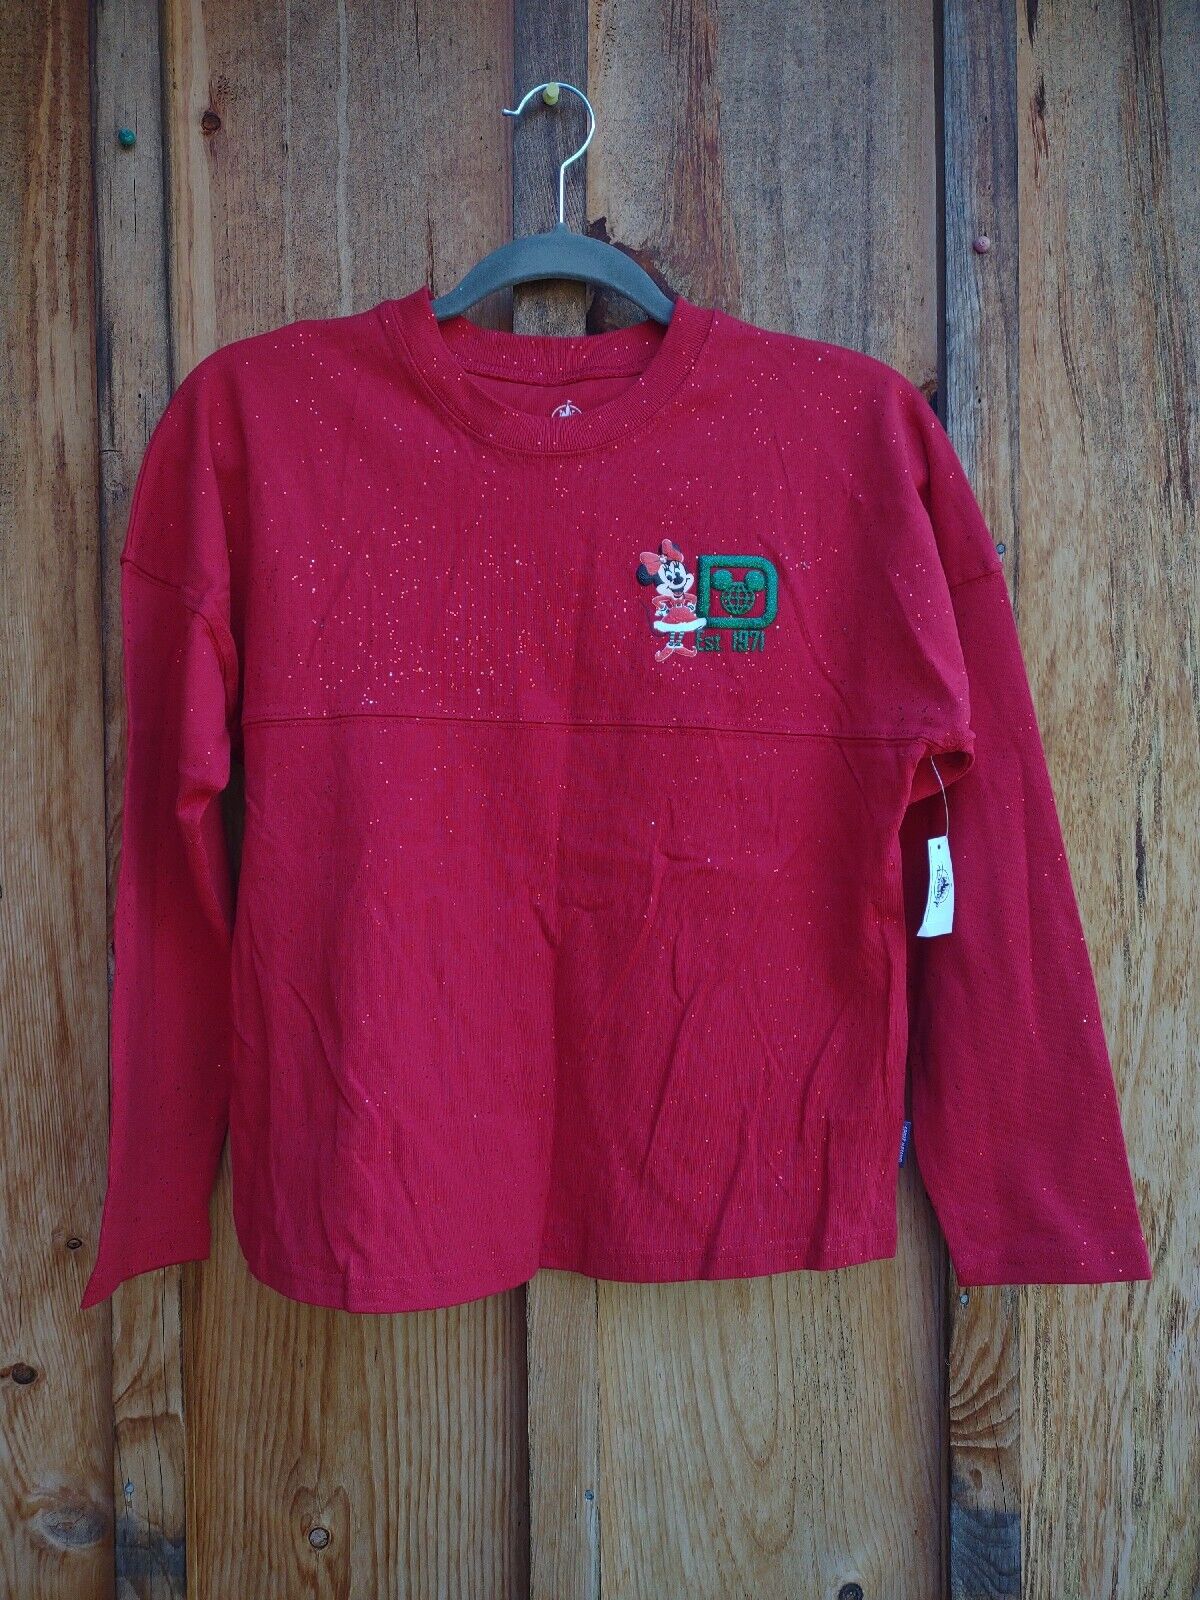 Disney: Spirit Jersey: Red: Authentic Original Collection: Youth XL: NWT